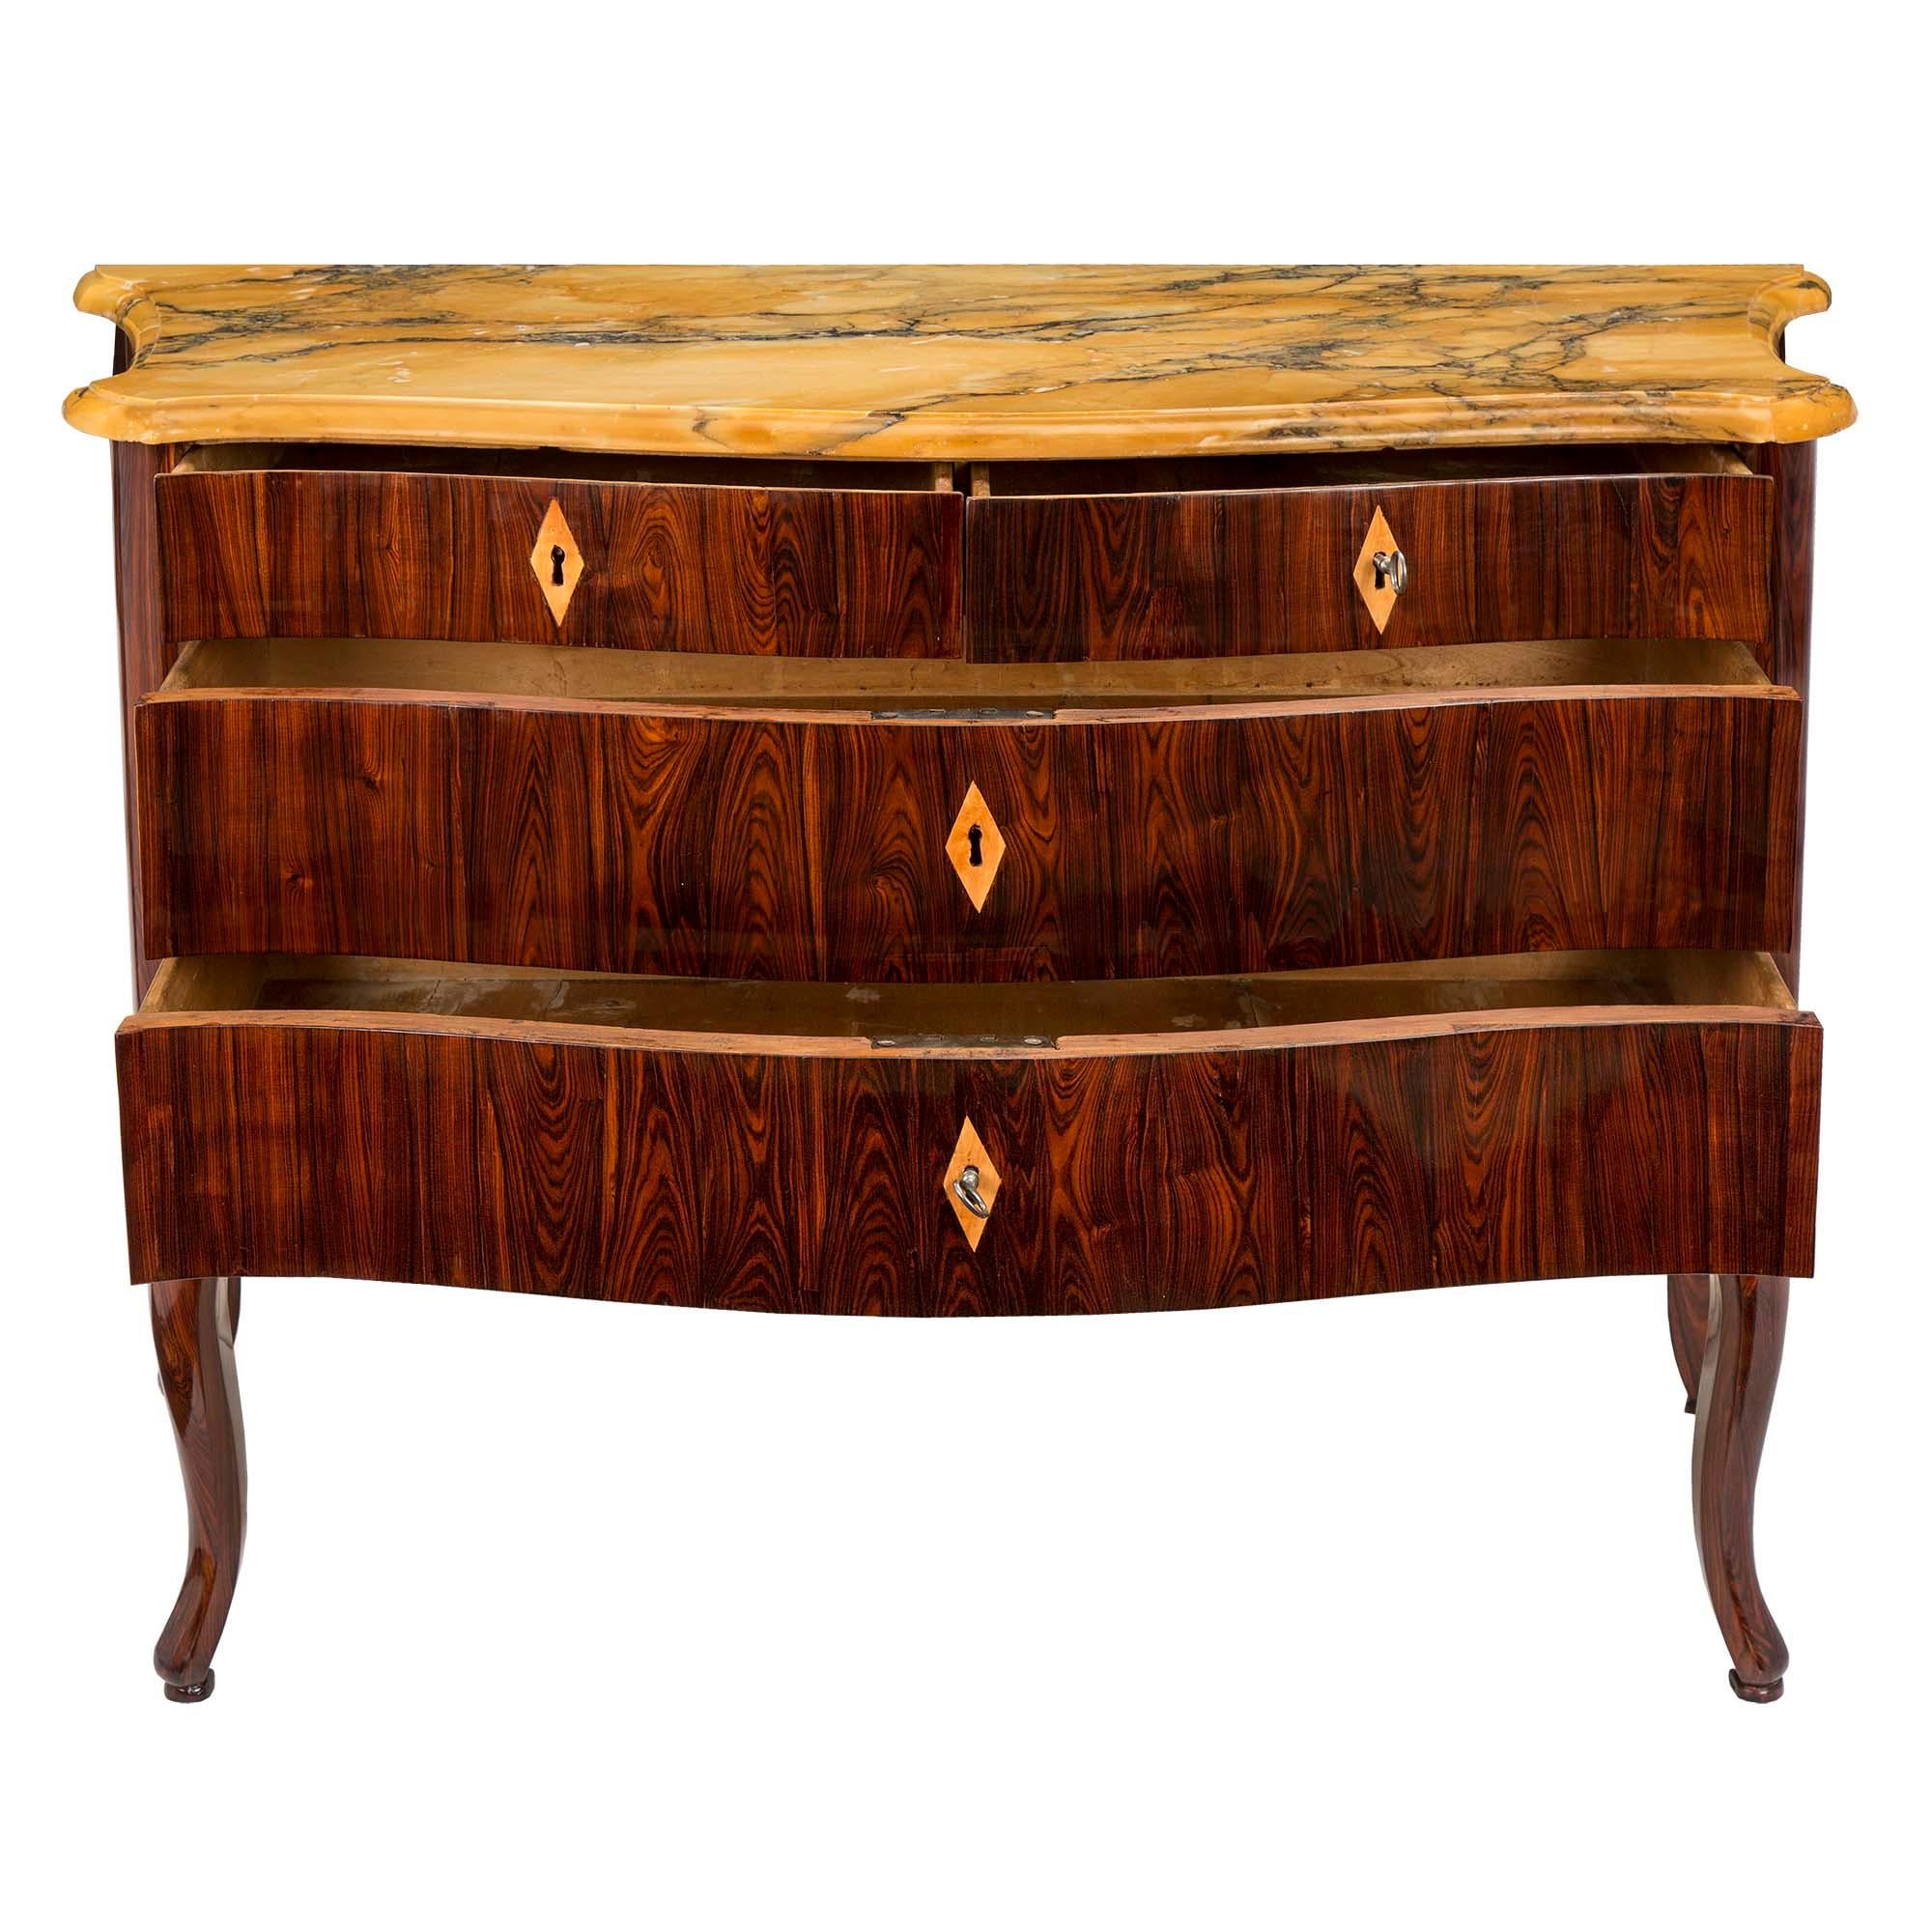 Italian 18th Century Louis XV Period Rosewood and Maplewood Chest In Good Condition For Sale In West Palm Beach, FL